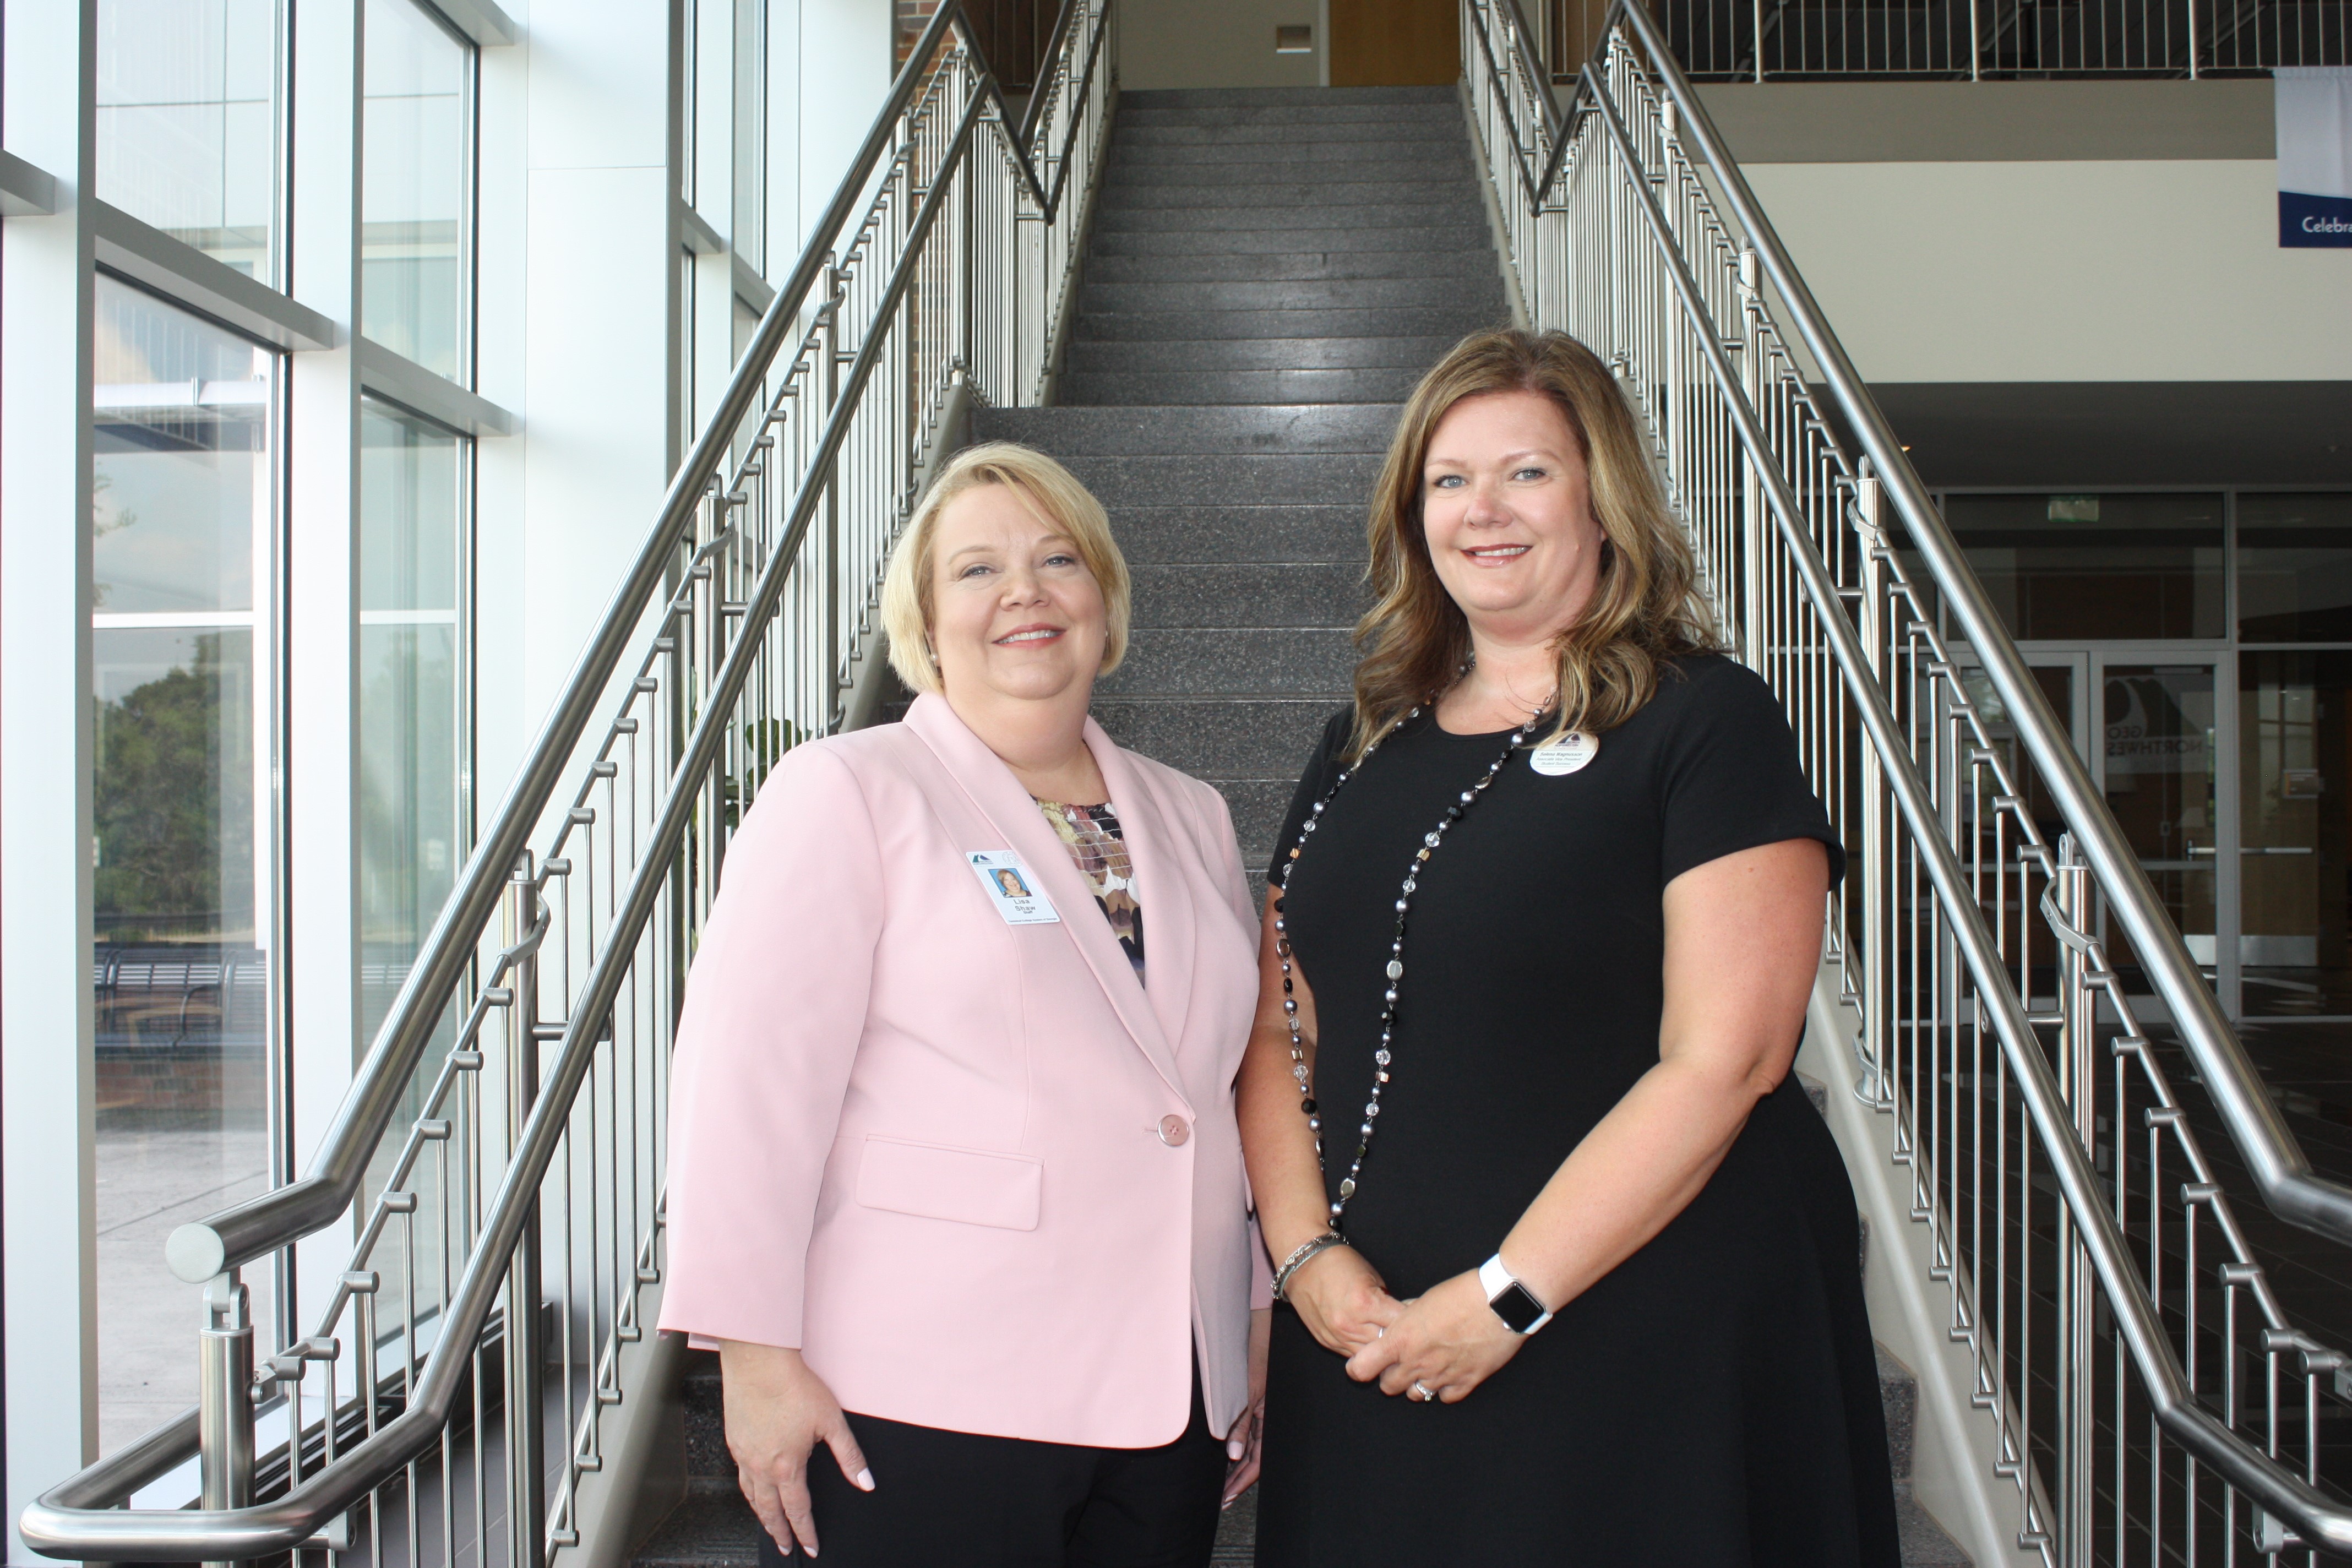 Selena Magnusson (right) of Chickamauga is the new vice president of Institutional Effectiveness and Student Success at GNTC and Melissa (Lisa) Shaw (left) of Chatsworth is GNTC’s new vice president of Adult Education.